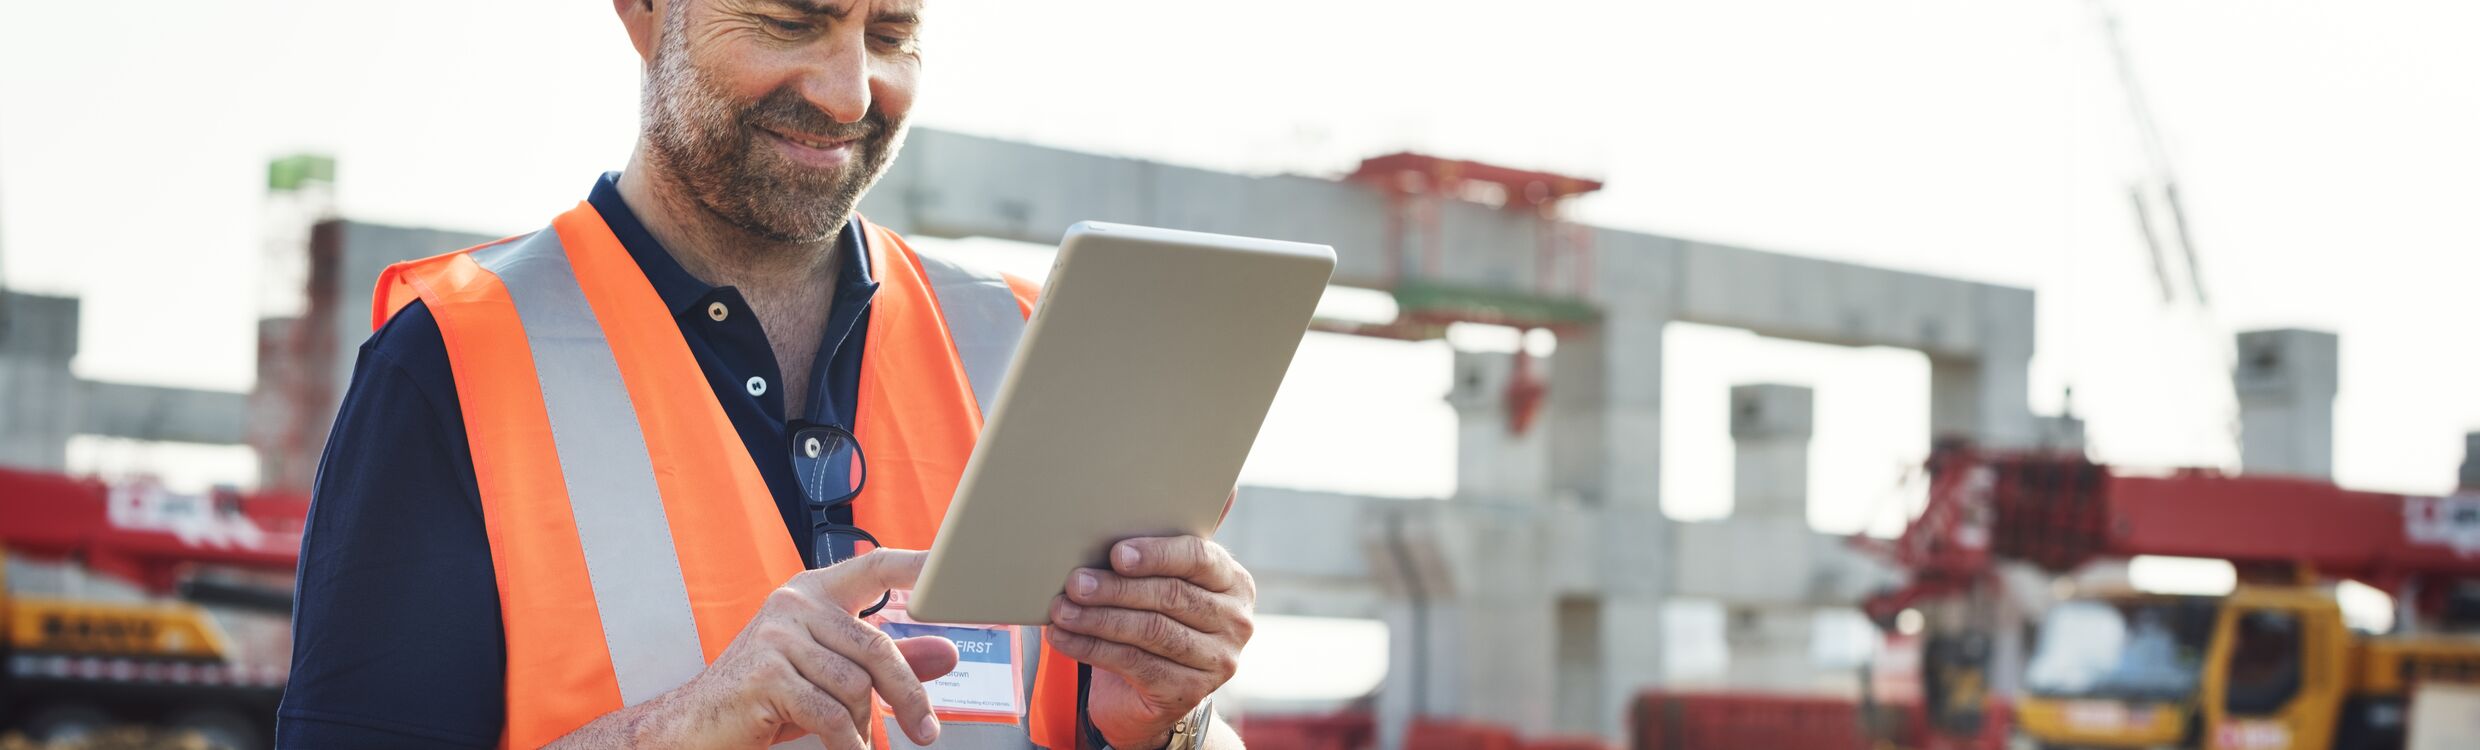 Utilities worker on job site uses tool tracking solution on his tablet to access tool information.